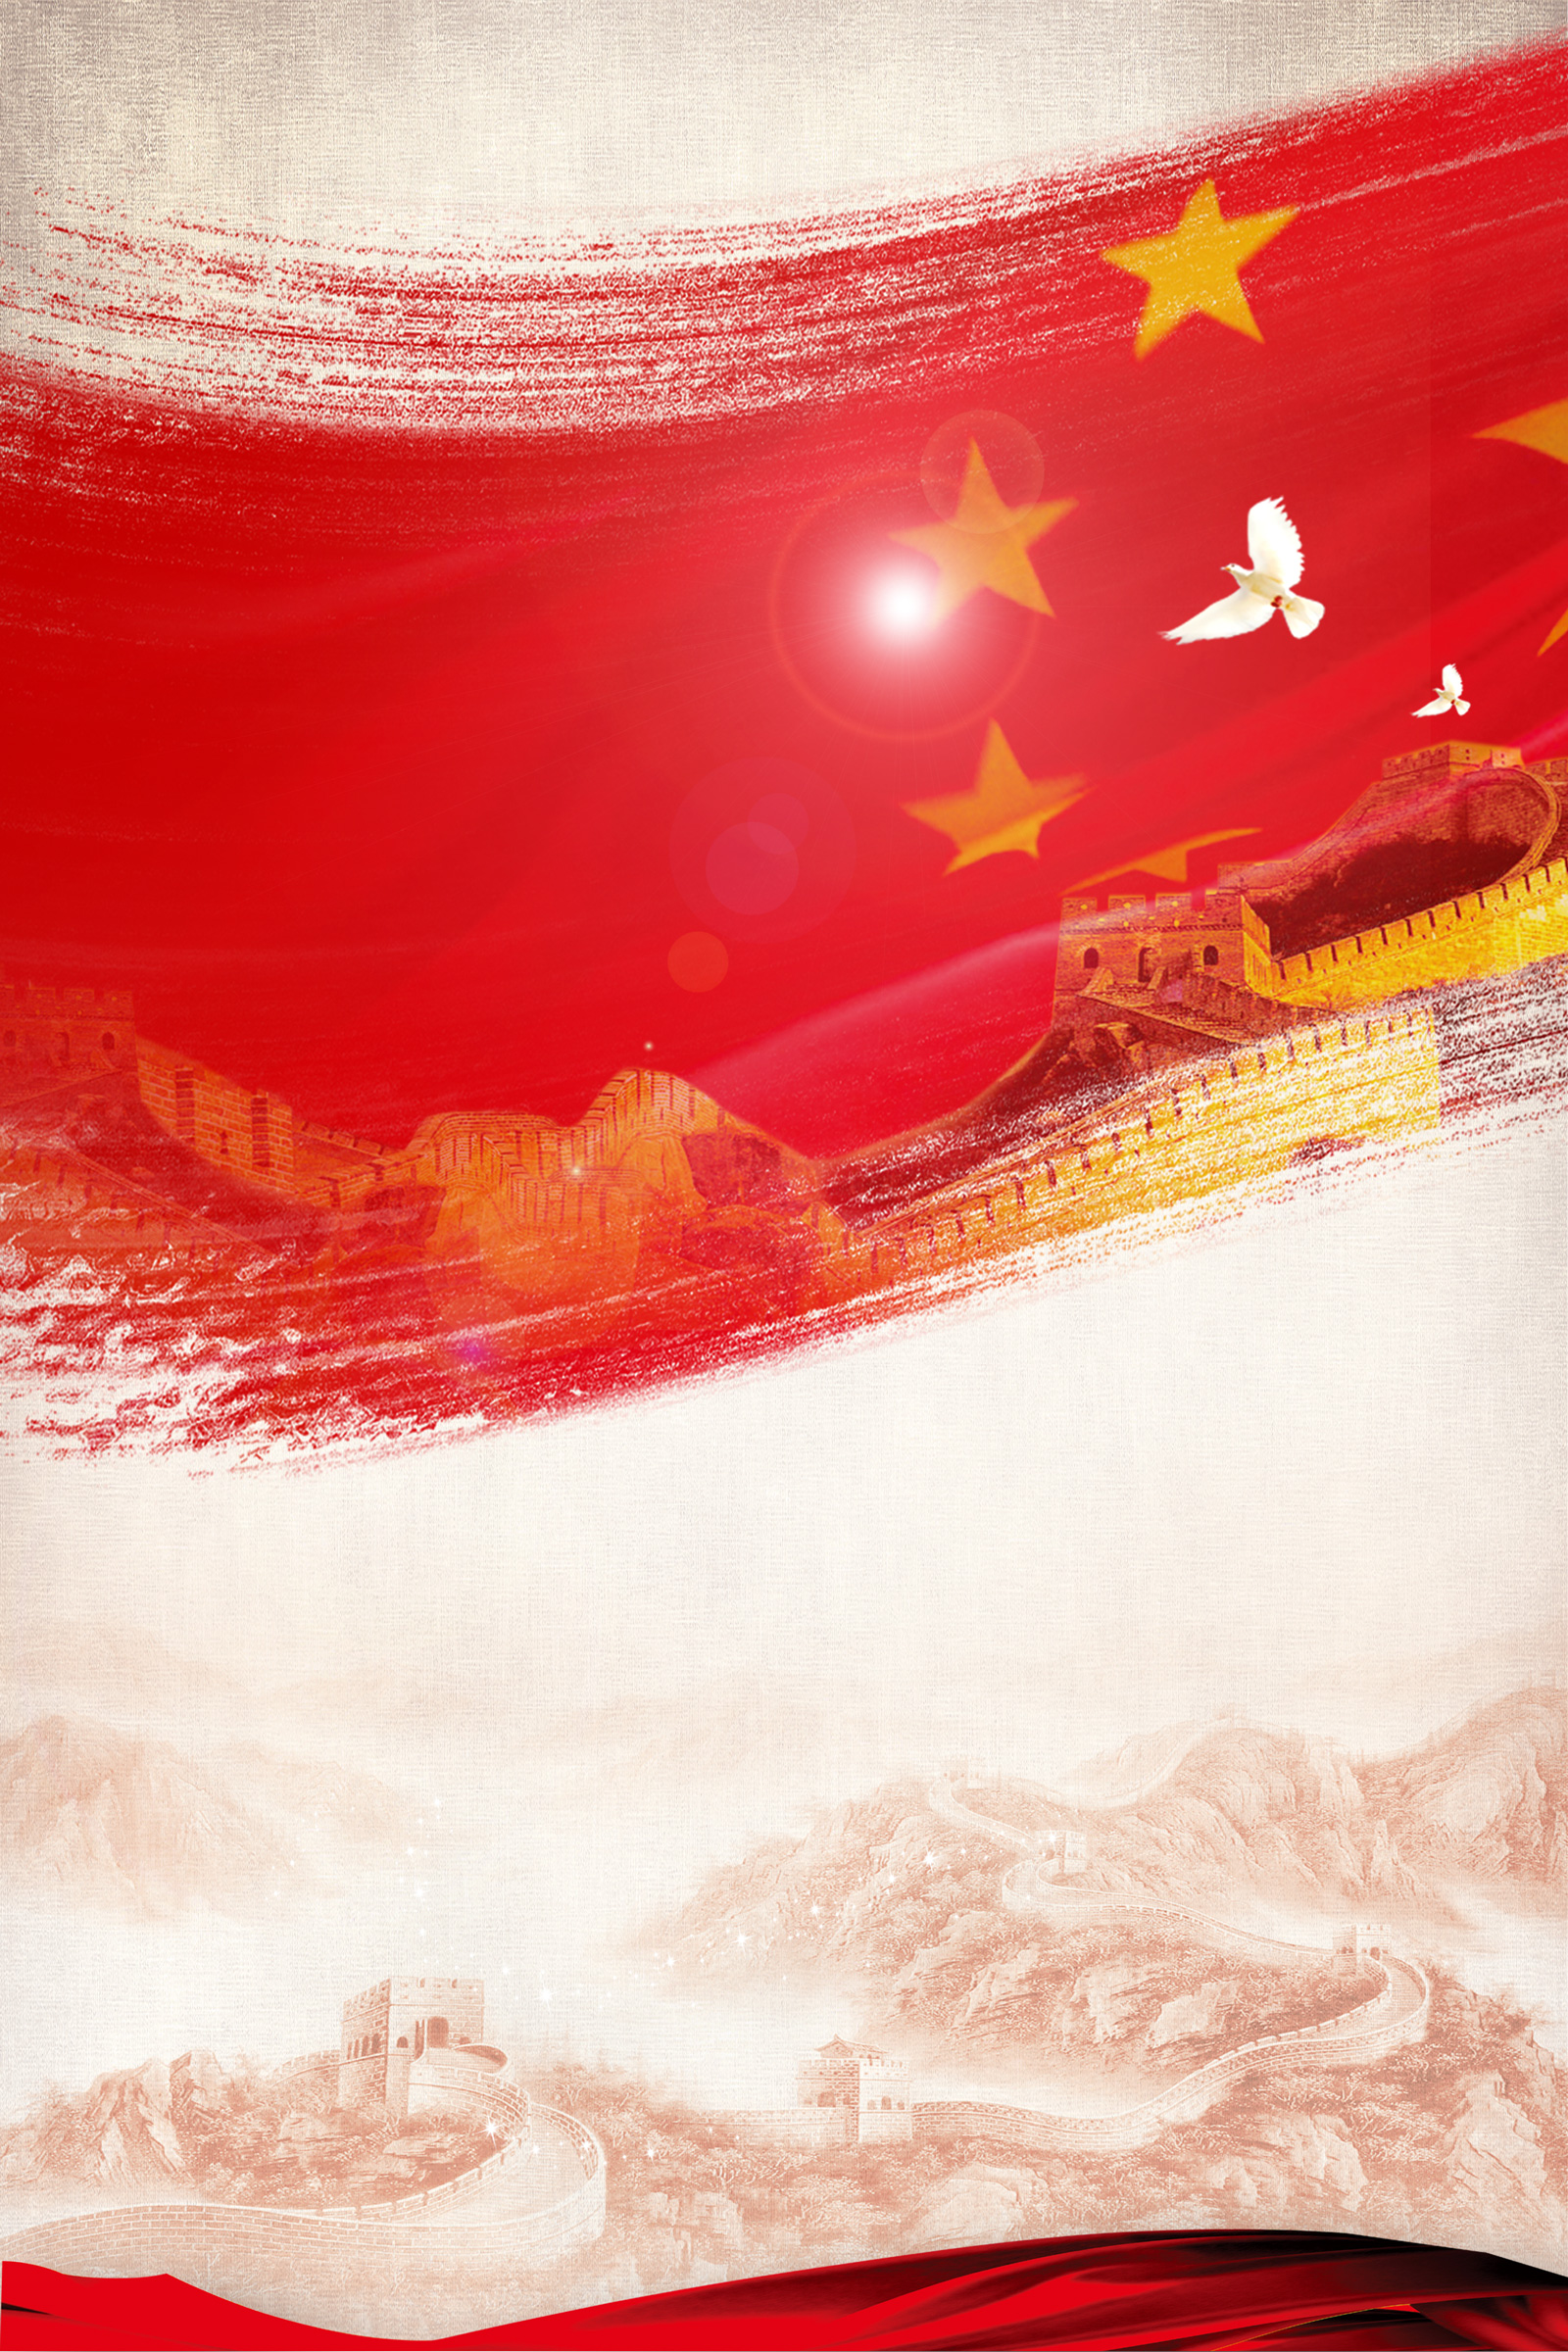 The Great Wall of China - PSD File Free Download